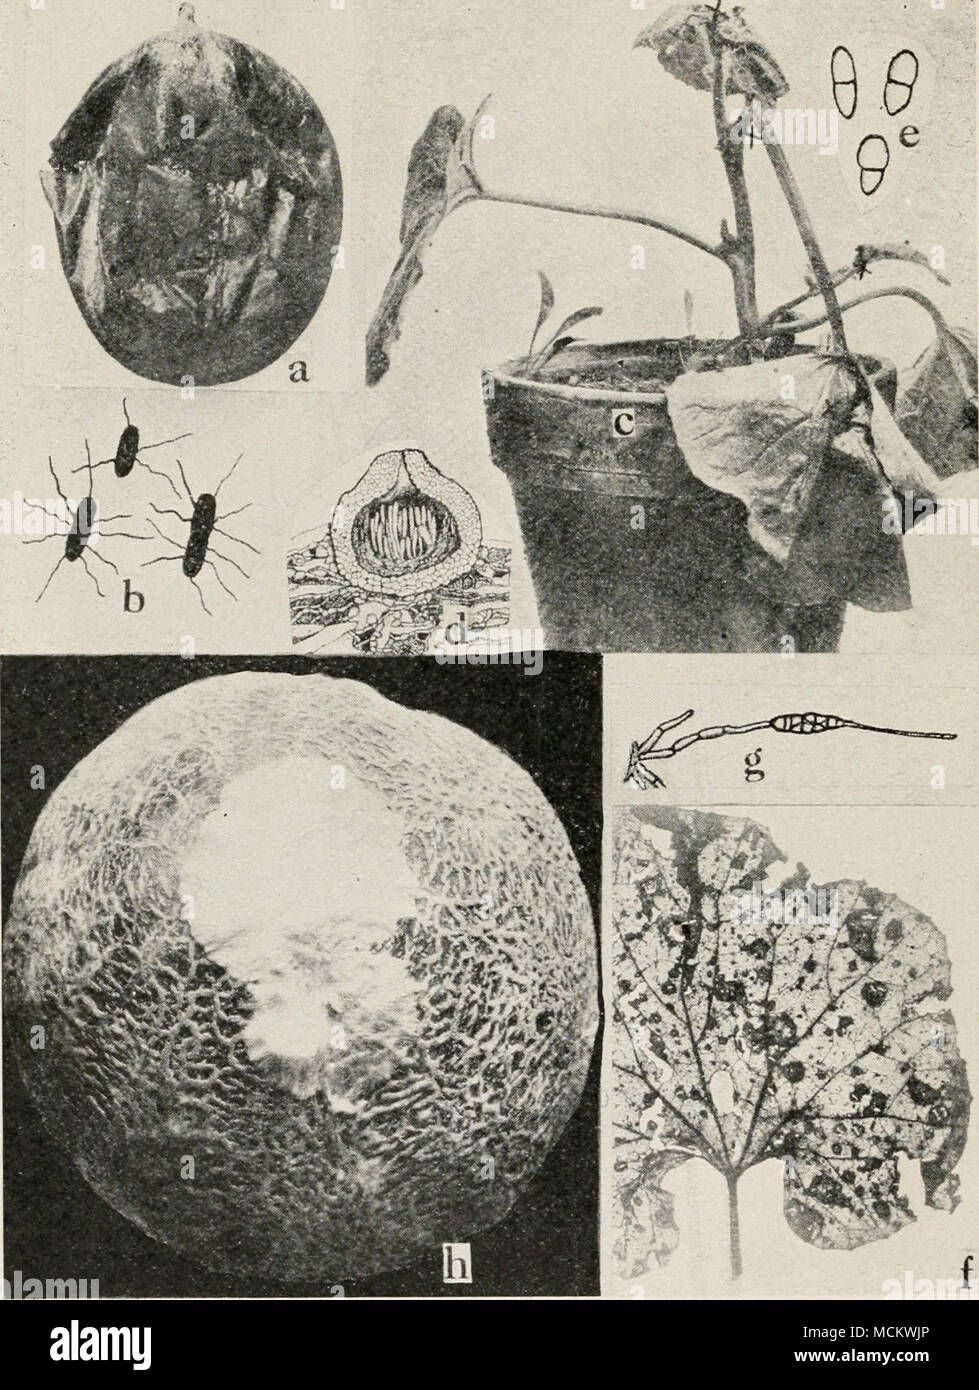 . Fig. 38. Cantaloup Diseases. a. Soft rot, b. individual germs of soft rot (a. and b. after Giddings), c. young cantaloup plant artificially inoculated with Mycospharella wilt, d. section through a perithecium of Mycospharella citrullina, showing immature asci, e. ascospores of M. citrullina (r. to e. after Grossenbacher),/. Alternaria leaf blight, g. Conidiophores and spore of Macrosporium cucumerinum (after Chester), h. Southern blight. Stock Photo